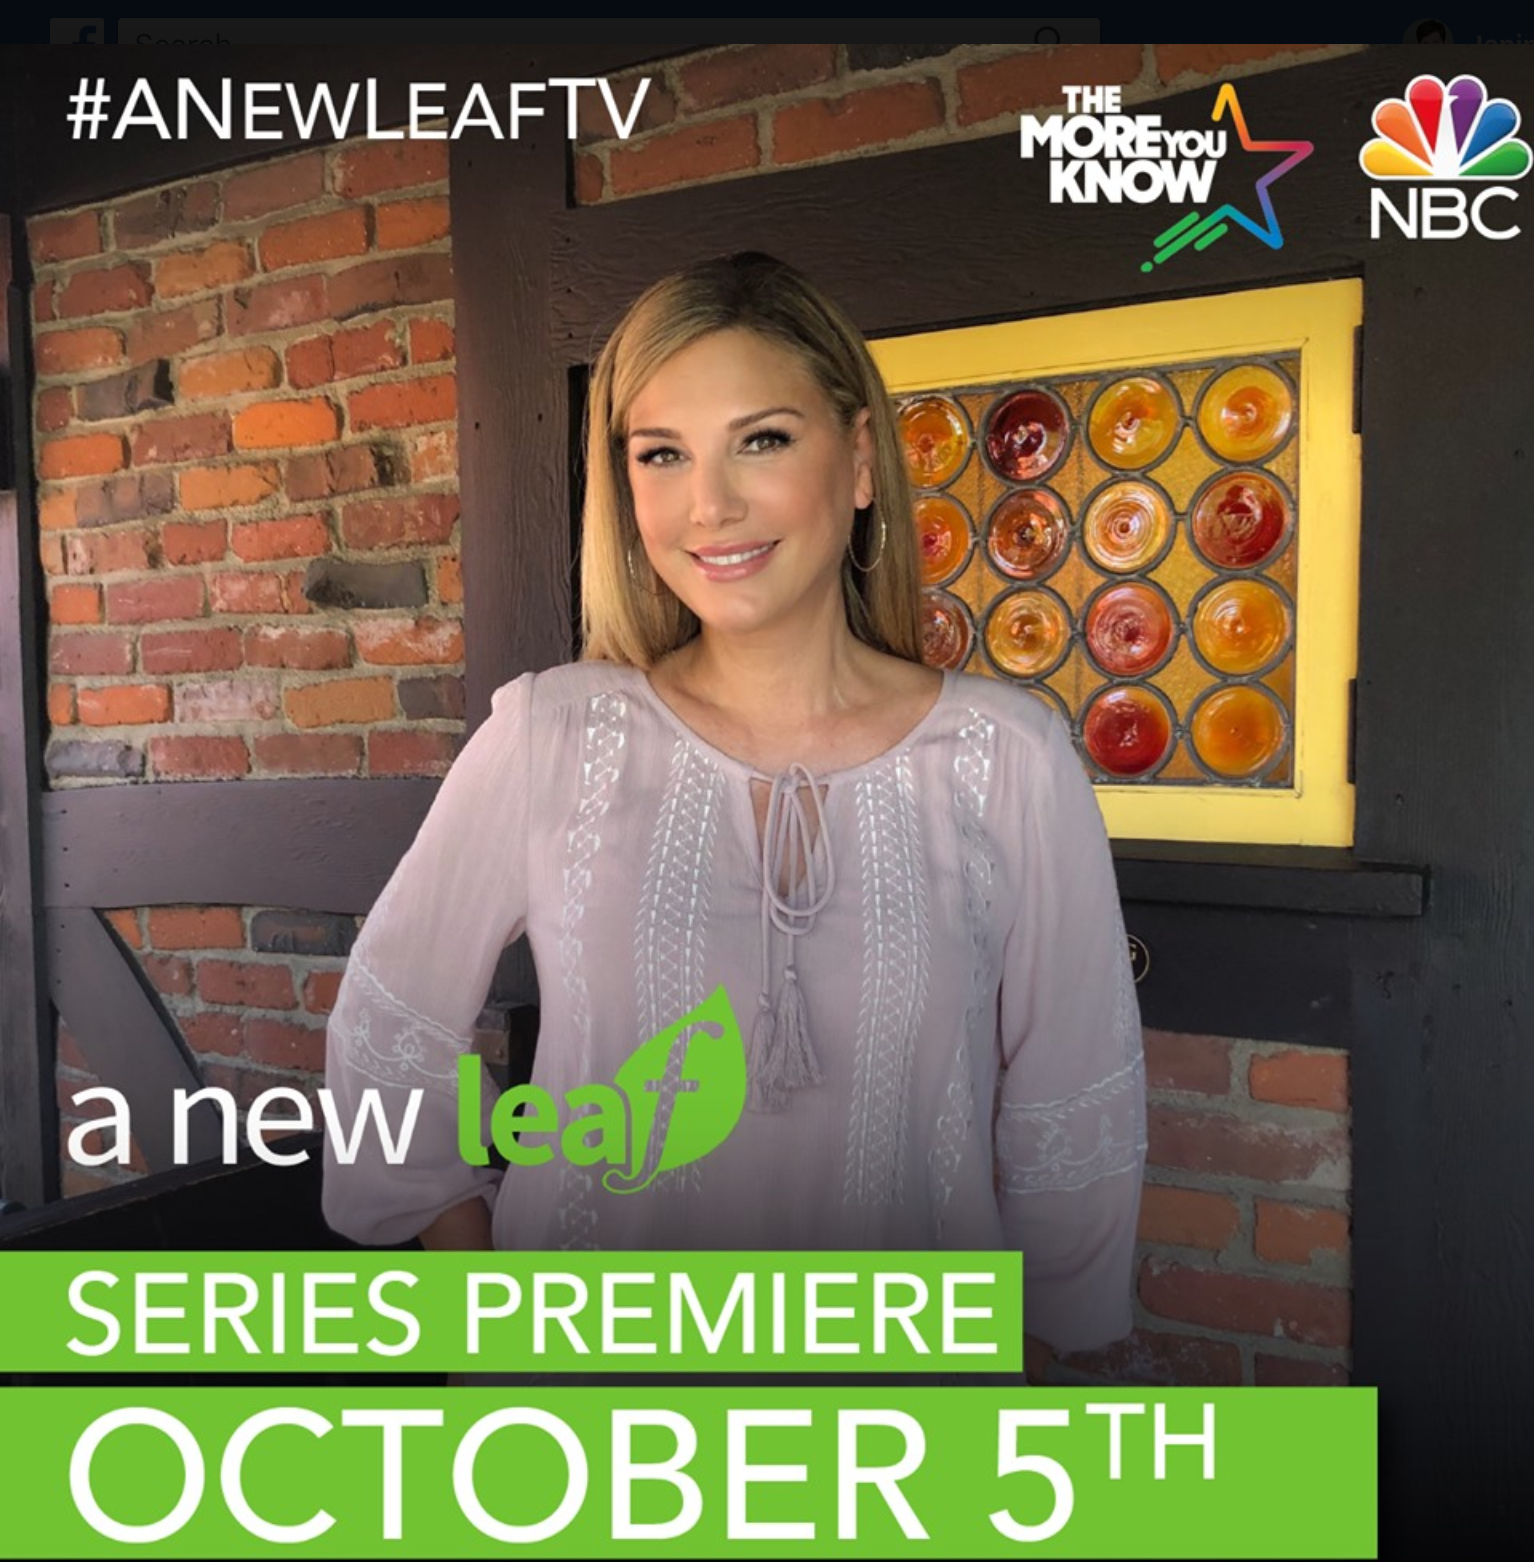 A new leaf show - “A New Leaf”, TV Series by Ancestry® to debut on NBC this Fall